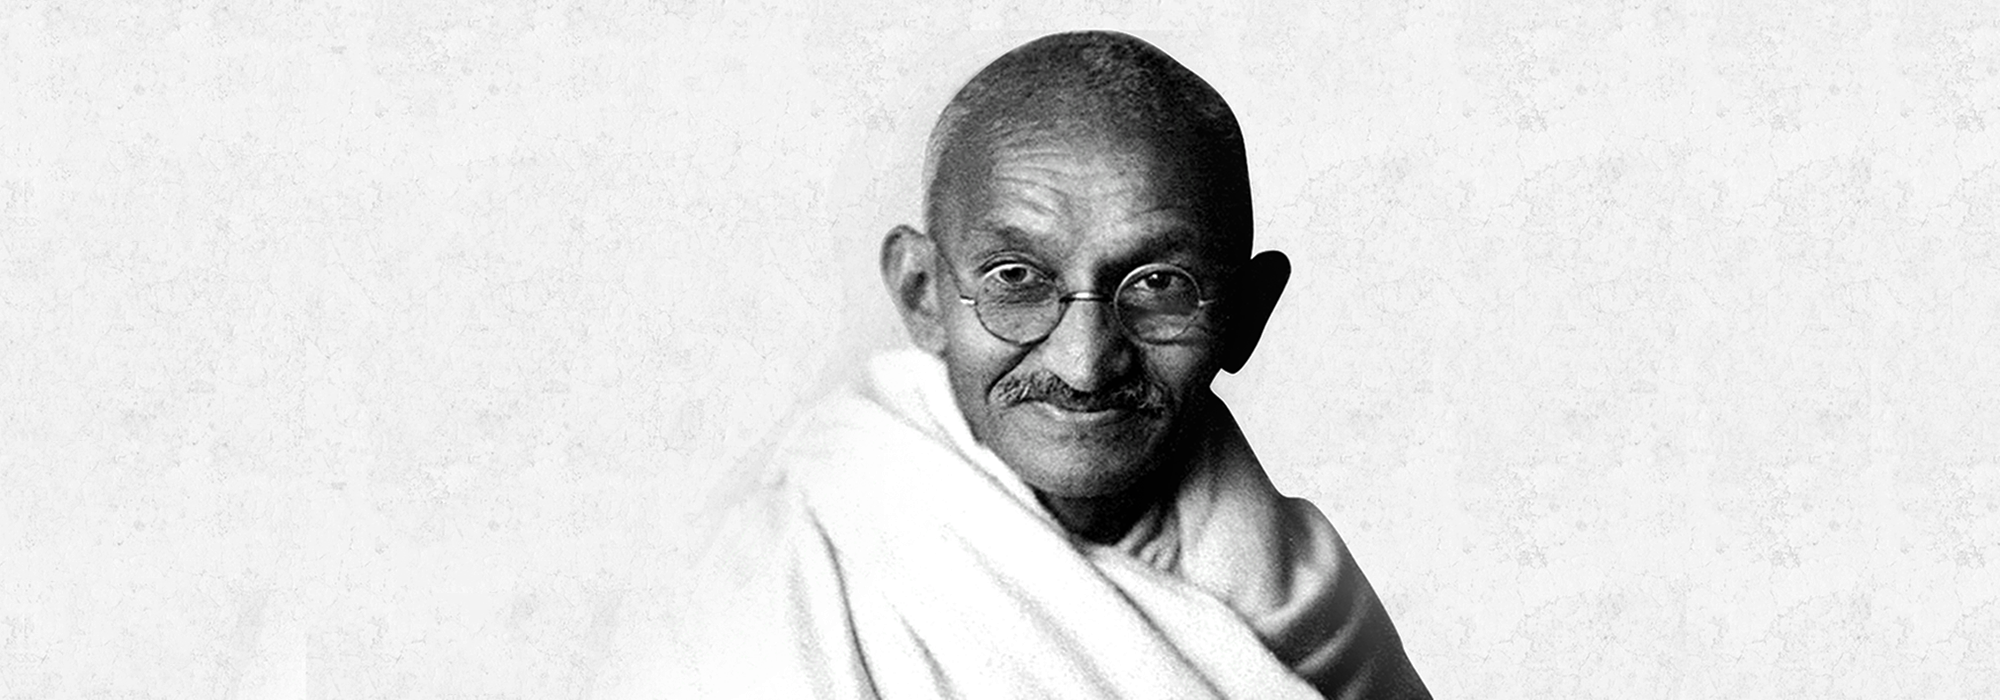 Gandhi at age 62 in England